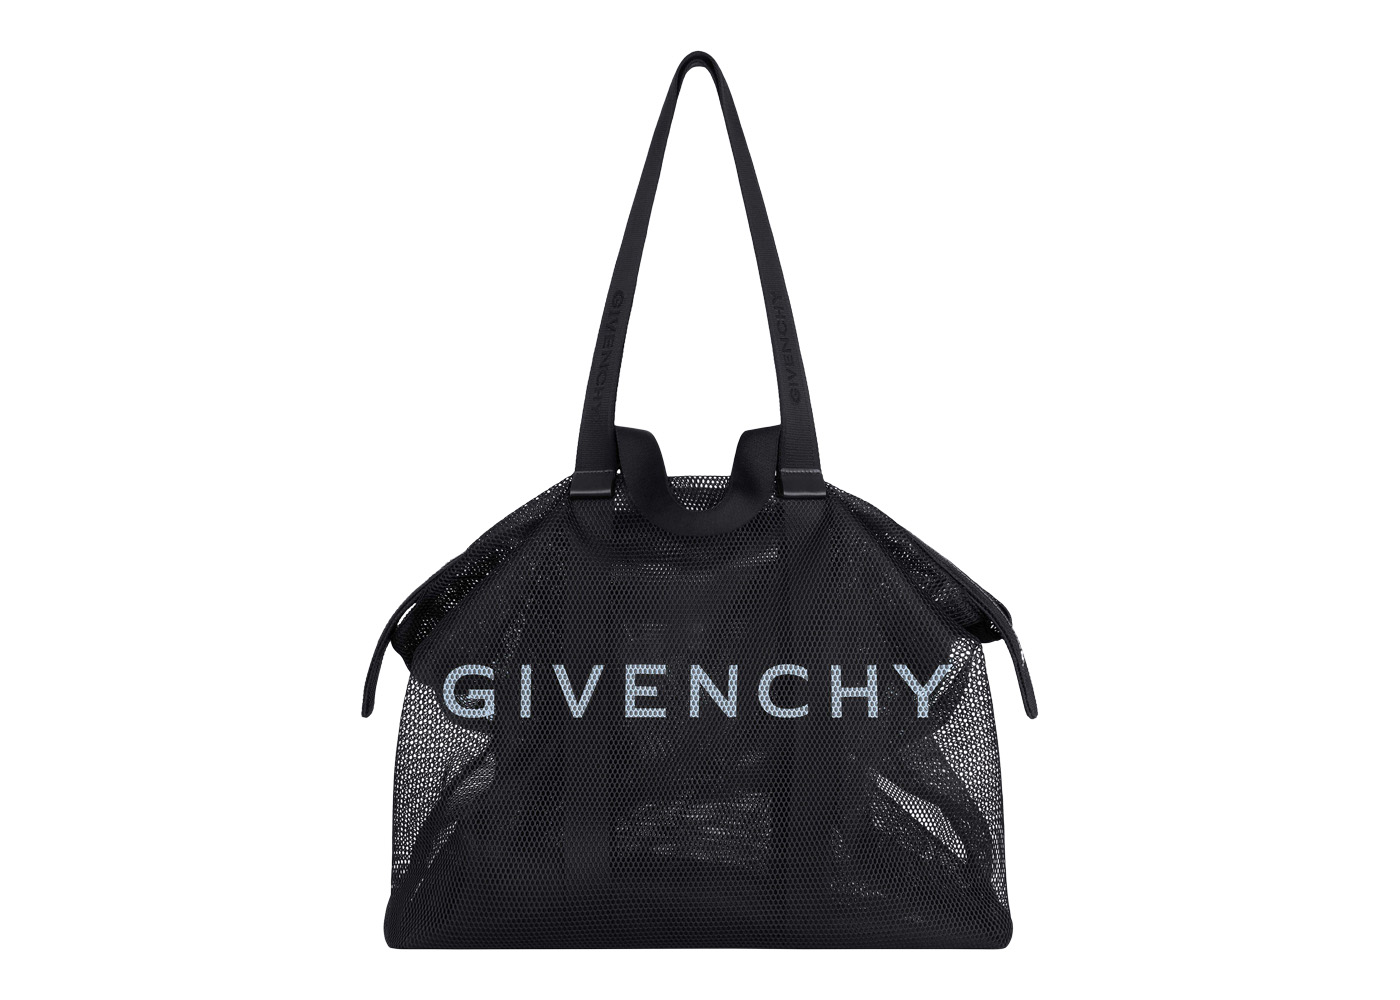 Thoughts on the Givenchy 4G Soft Quilted Leather Bag? : r/handbags